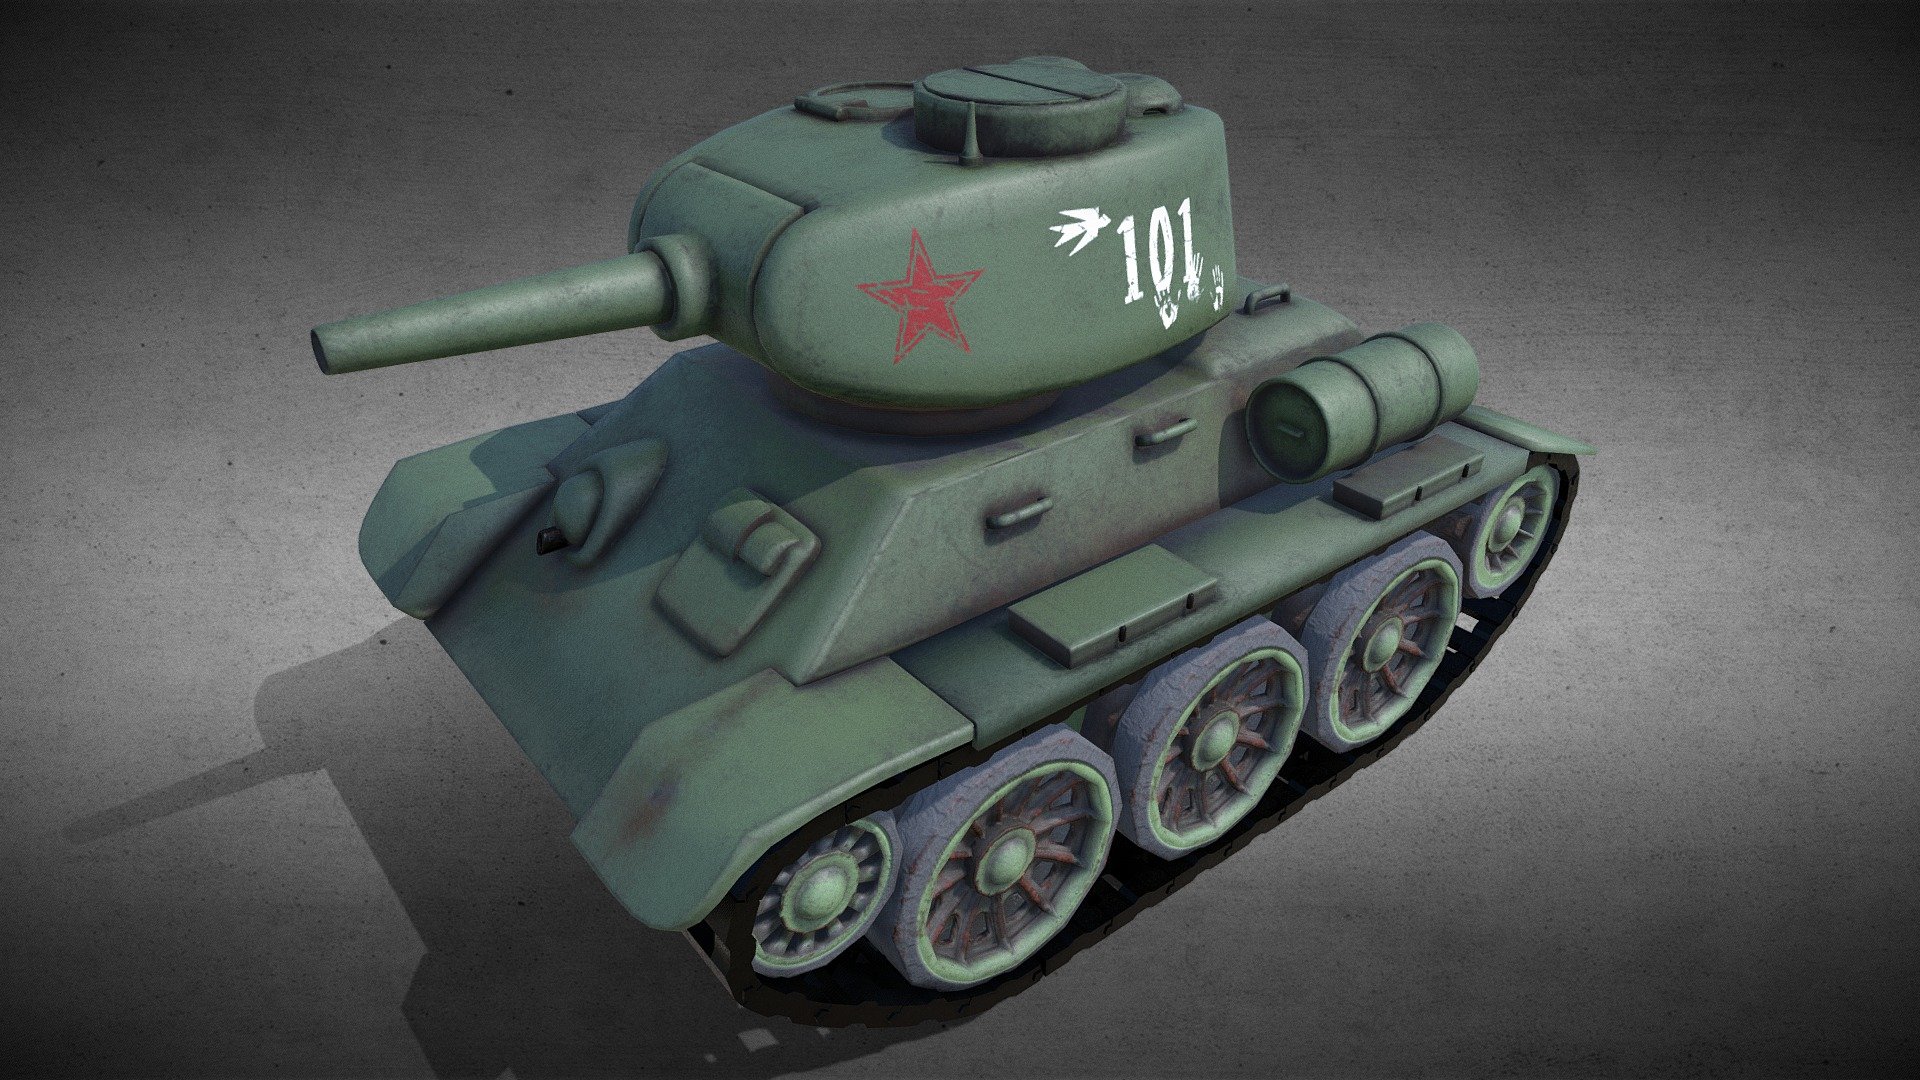 Mini T34-85 Russian Tank


Mini T34 model with 2k textures. Stylized to give it child toy look. Made with Blender 2.8 for game development and animation use. 

Model characteristics:
- quad based topology (few n-gons and tris)
- uv unwrapped ( non-overlaping)
- 2k textures PBR:
   Diffuse,Metalic,Roughness,BumpMap,NormalMap

Thanks for viewing. Likes, comments and requests welcome 3d model